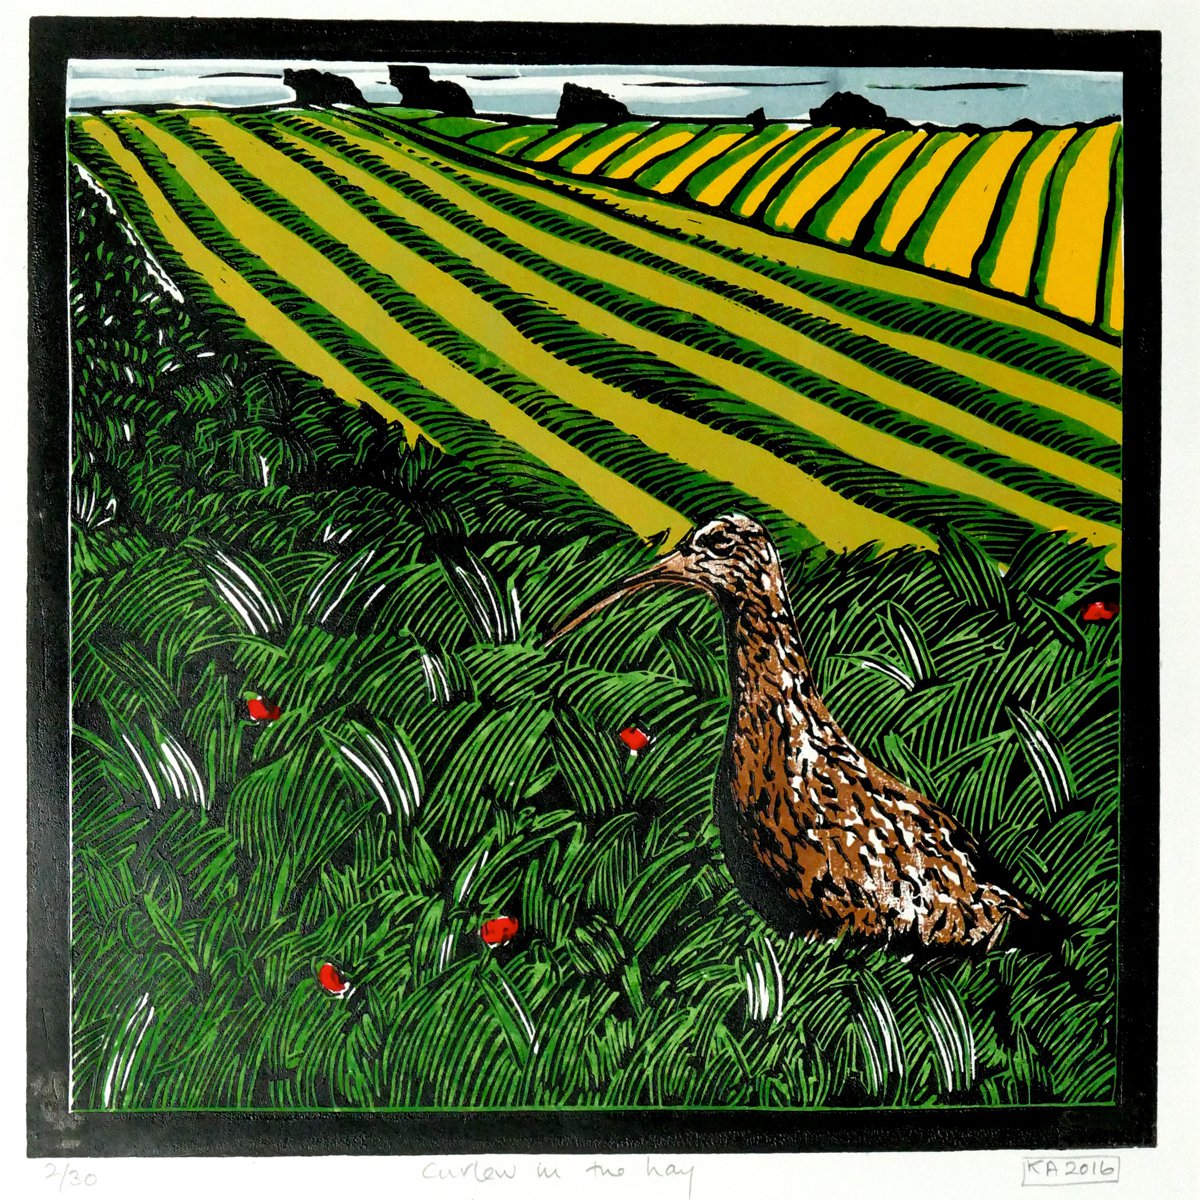 Curlew in the Hay by Keith Alexander